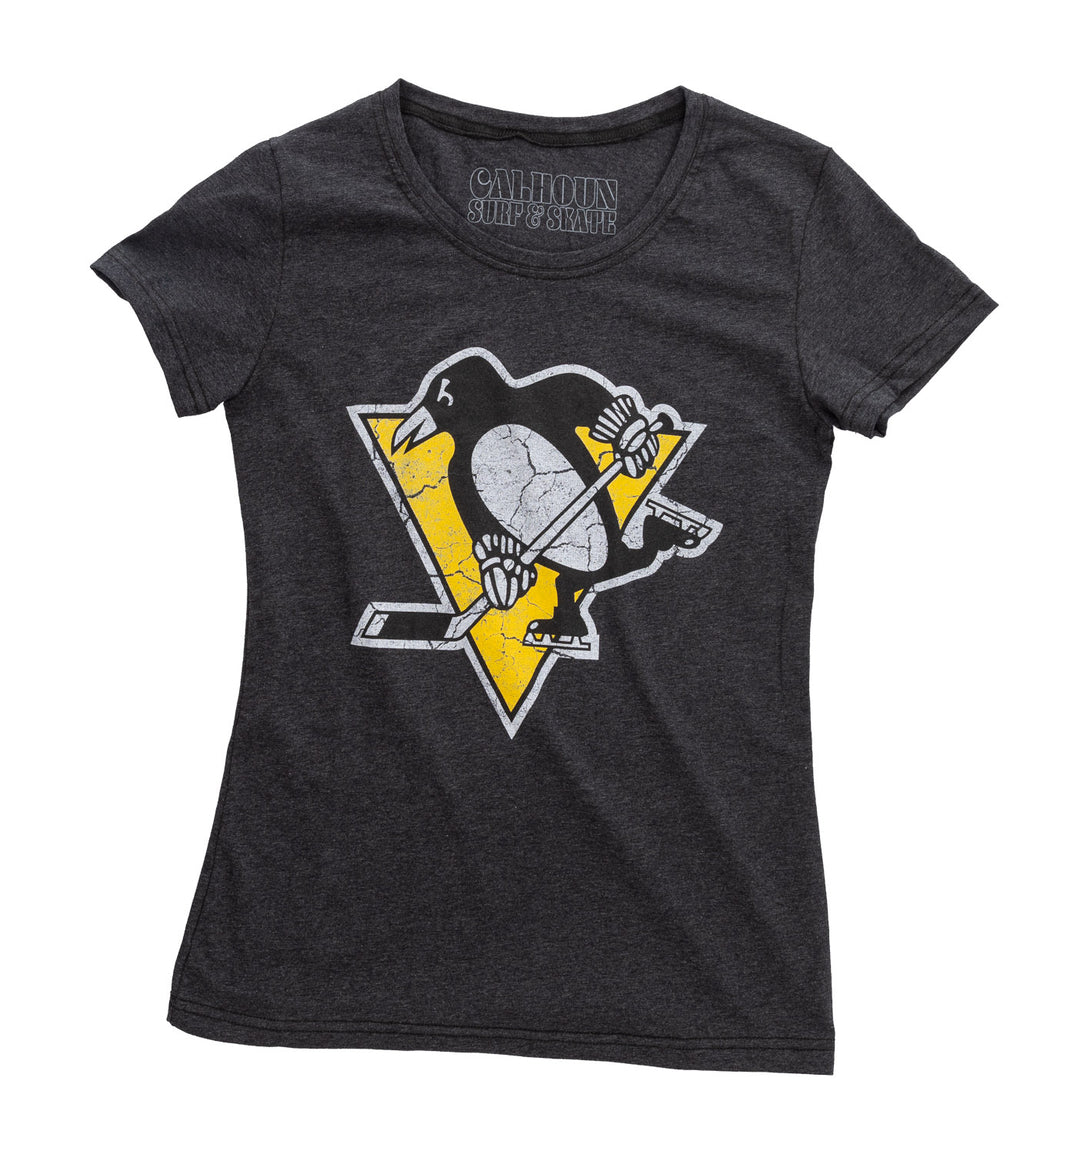 Pittsburgh Penguins Women's Distressed Print Fitted Crew Neck Premium T-Shirt - Black